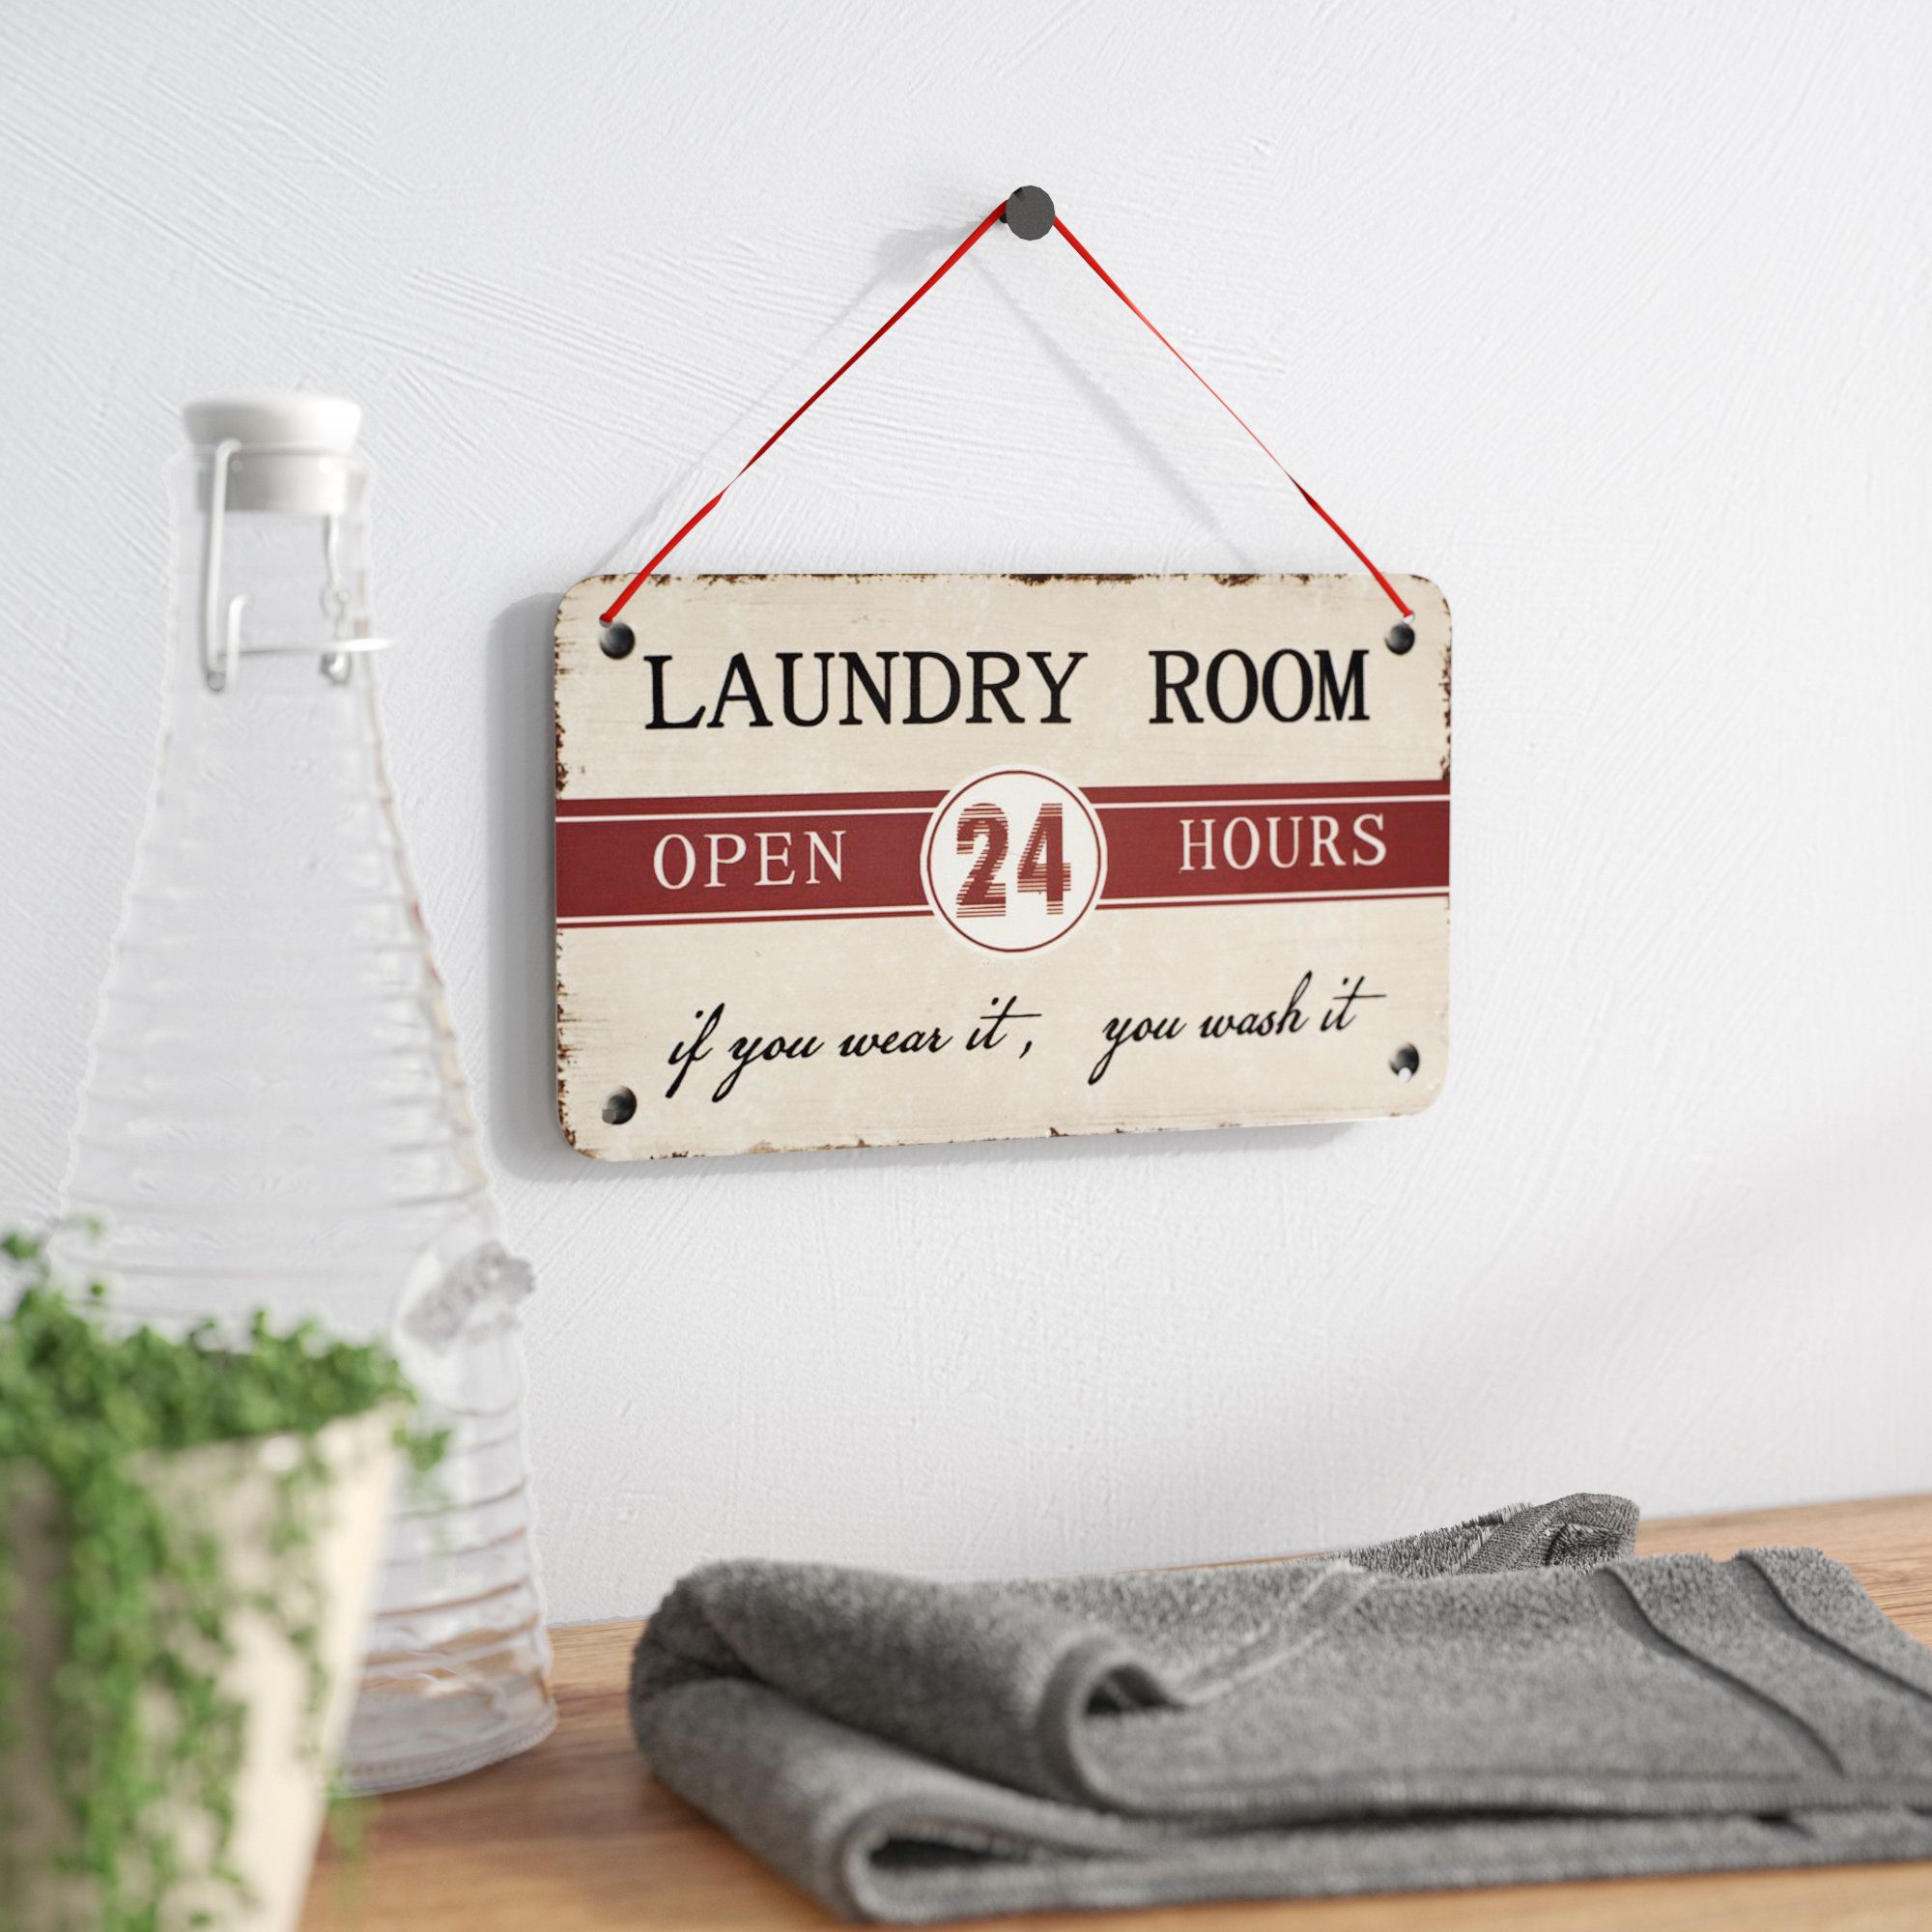 "laundry Room" Antique Wisdom Sign Wall Décor Pertaining To Metal Laundry Room Wall Decor (View 6 of 30)